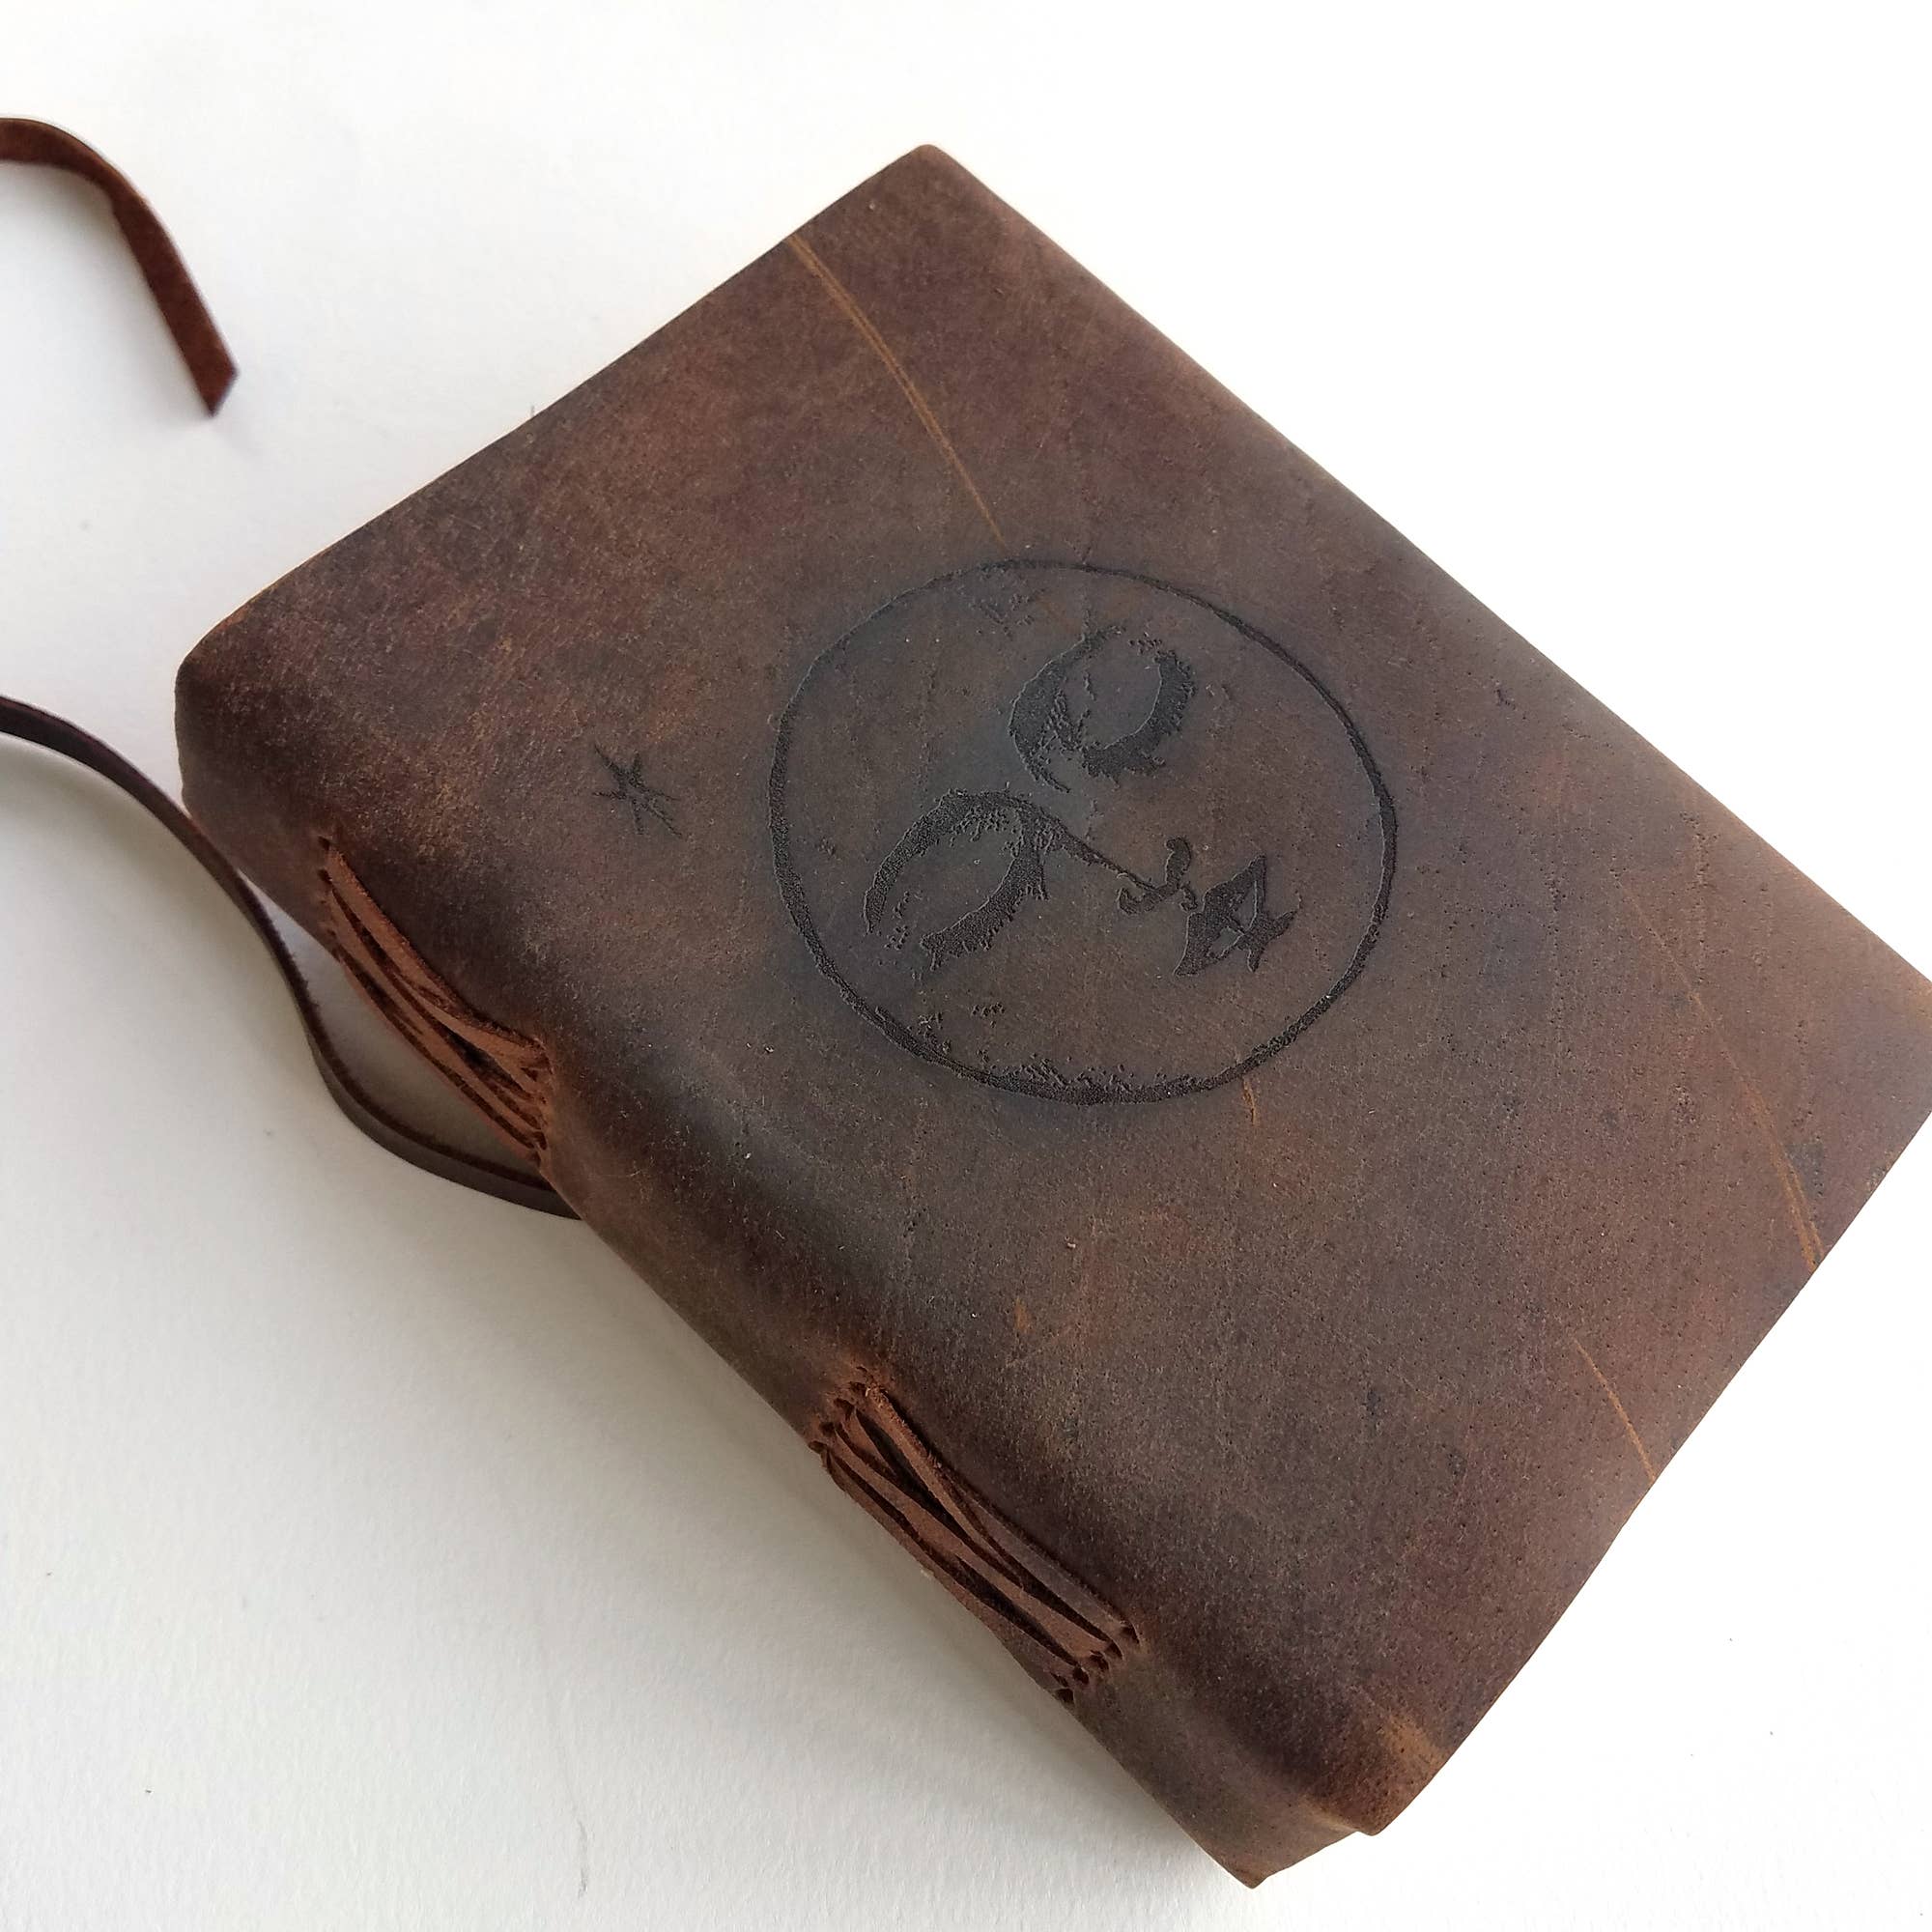 Sleeping Moon Leather Journal With Cord, Unlined Paper